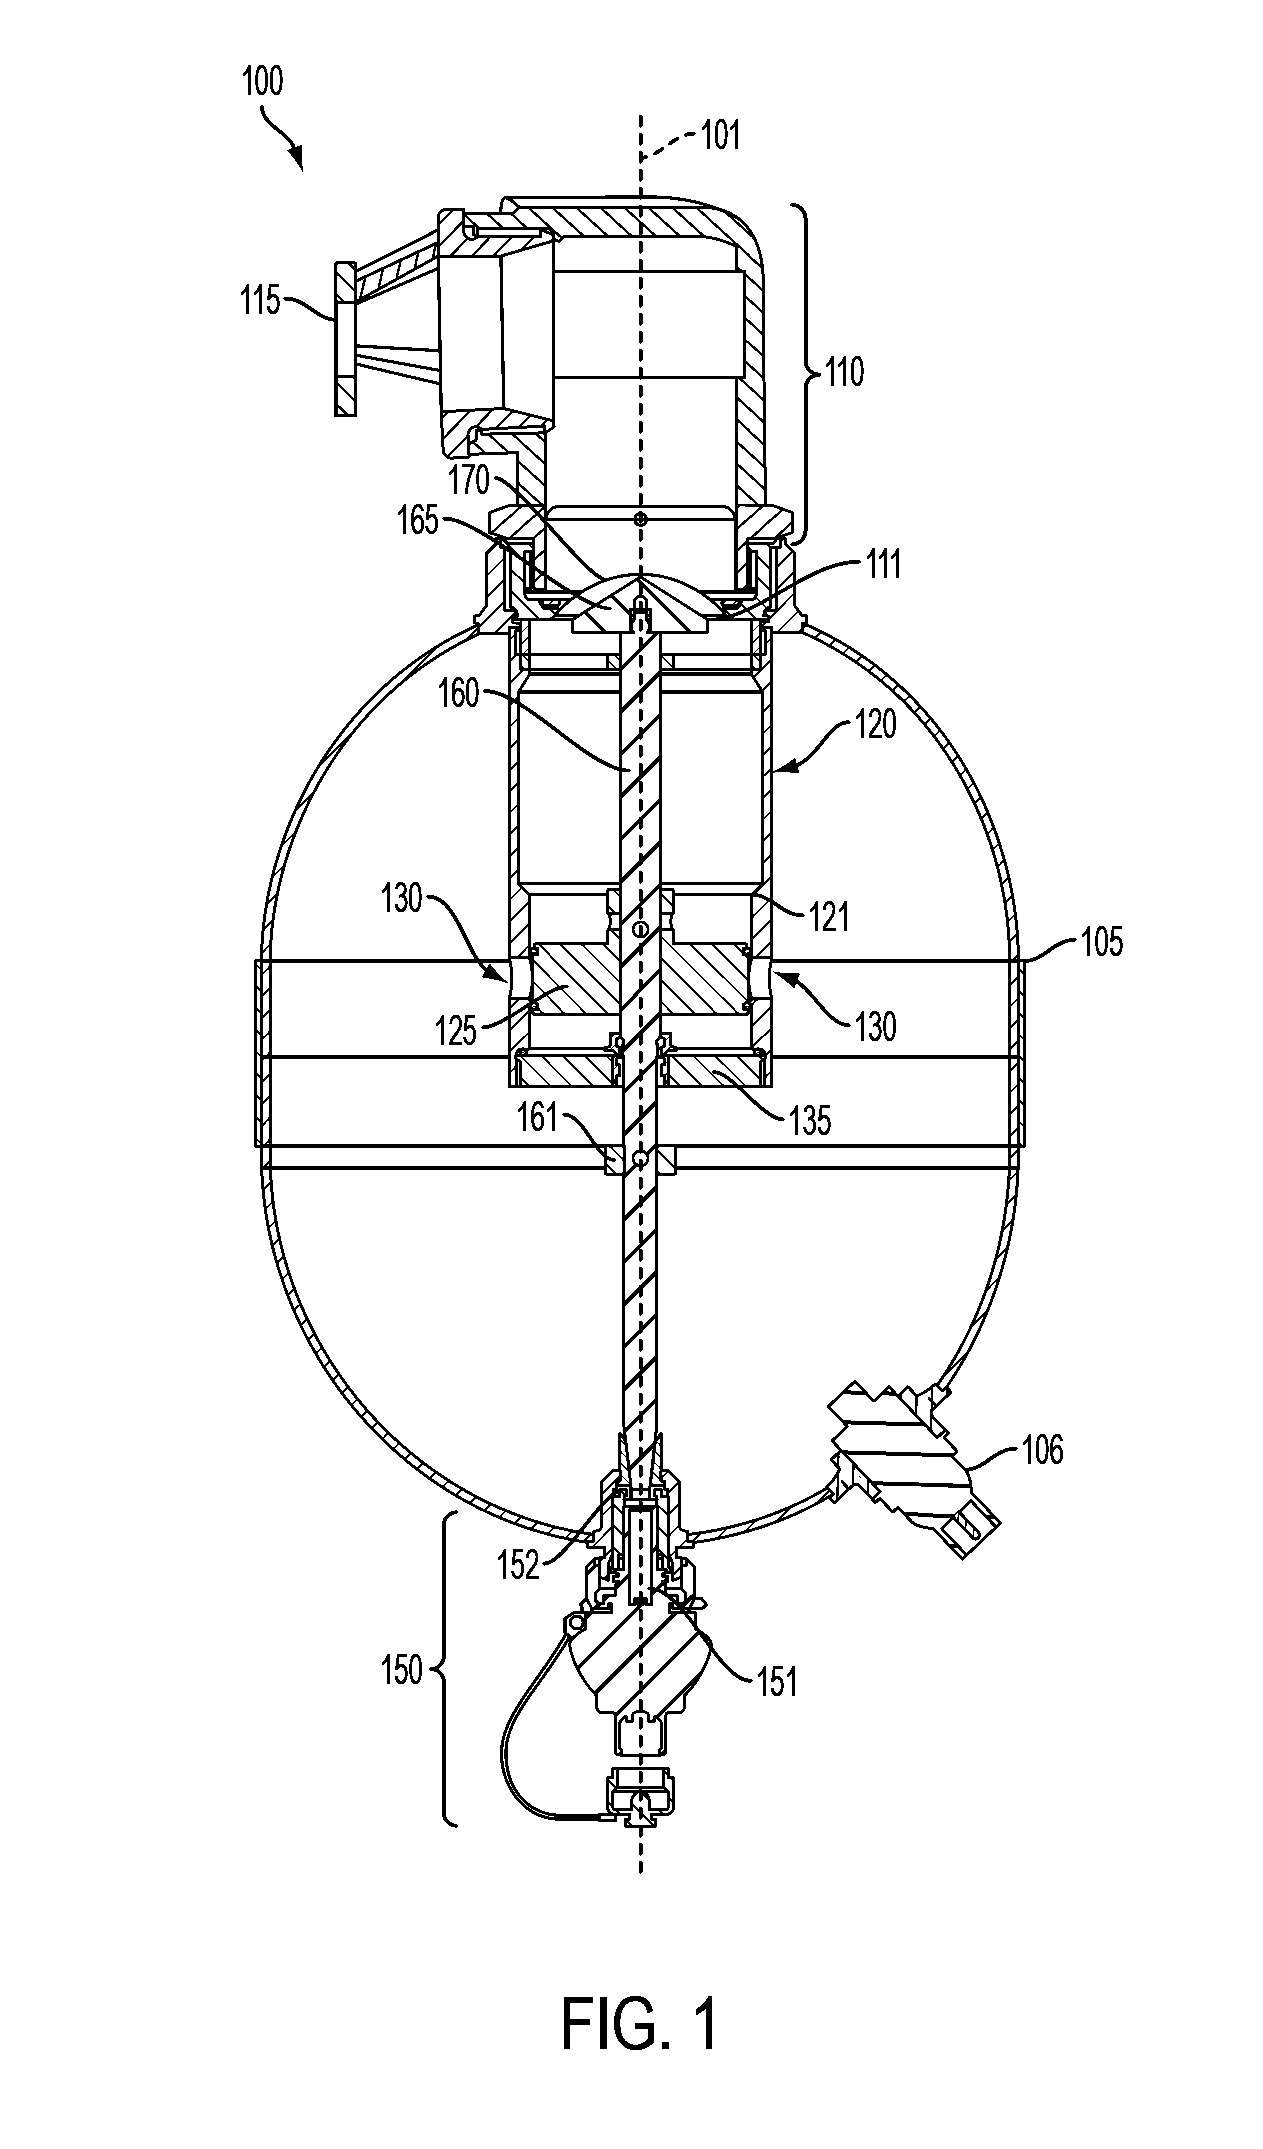 Automatic fire extinguishing system with gaseous and dry powder fire suppression agents